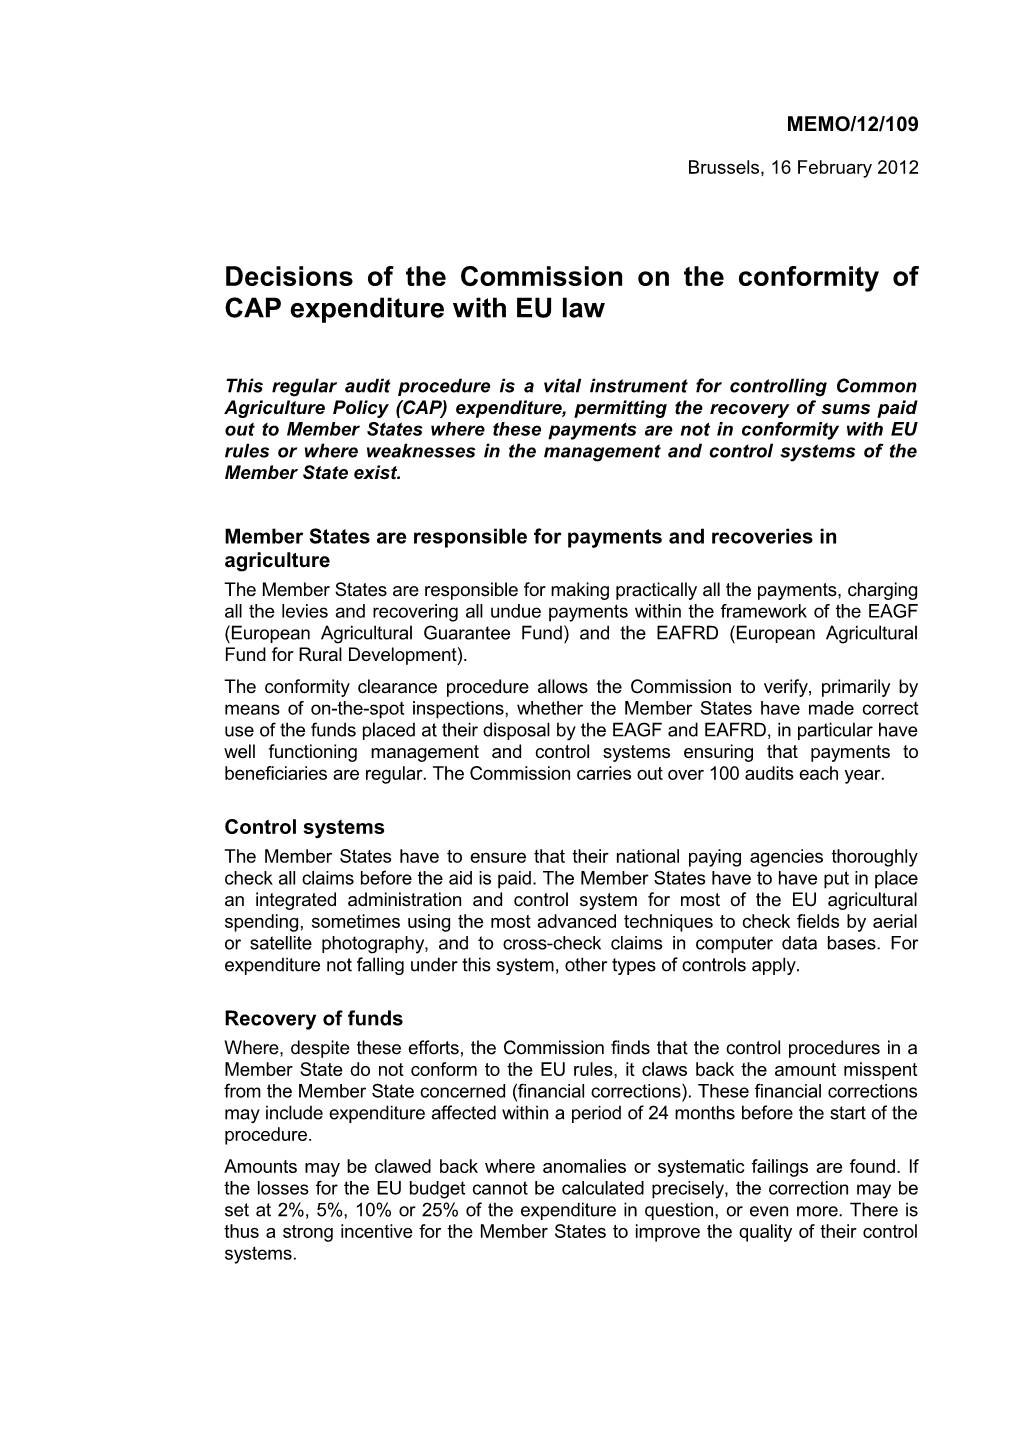 Decisions of the Commission on the Conformity of CAP Expenditure with EU Law